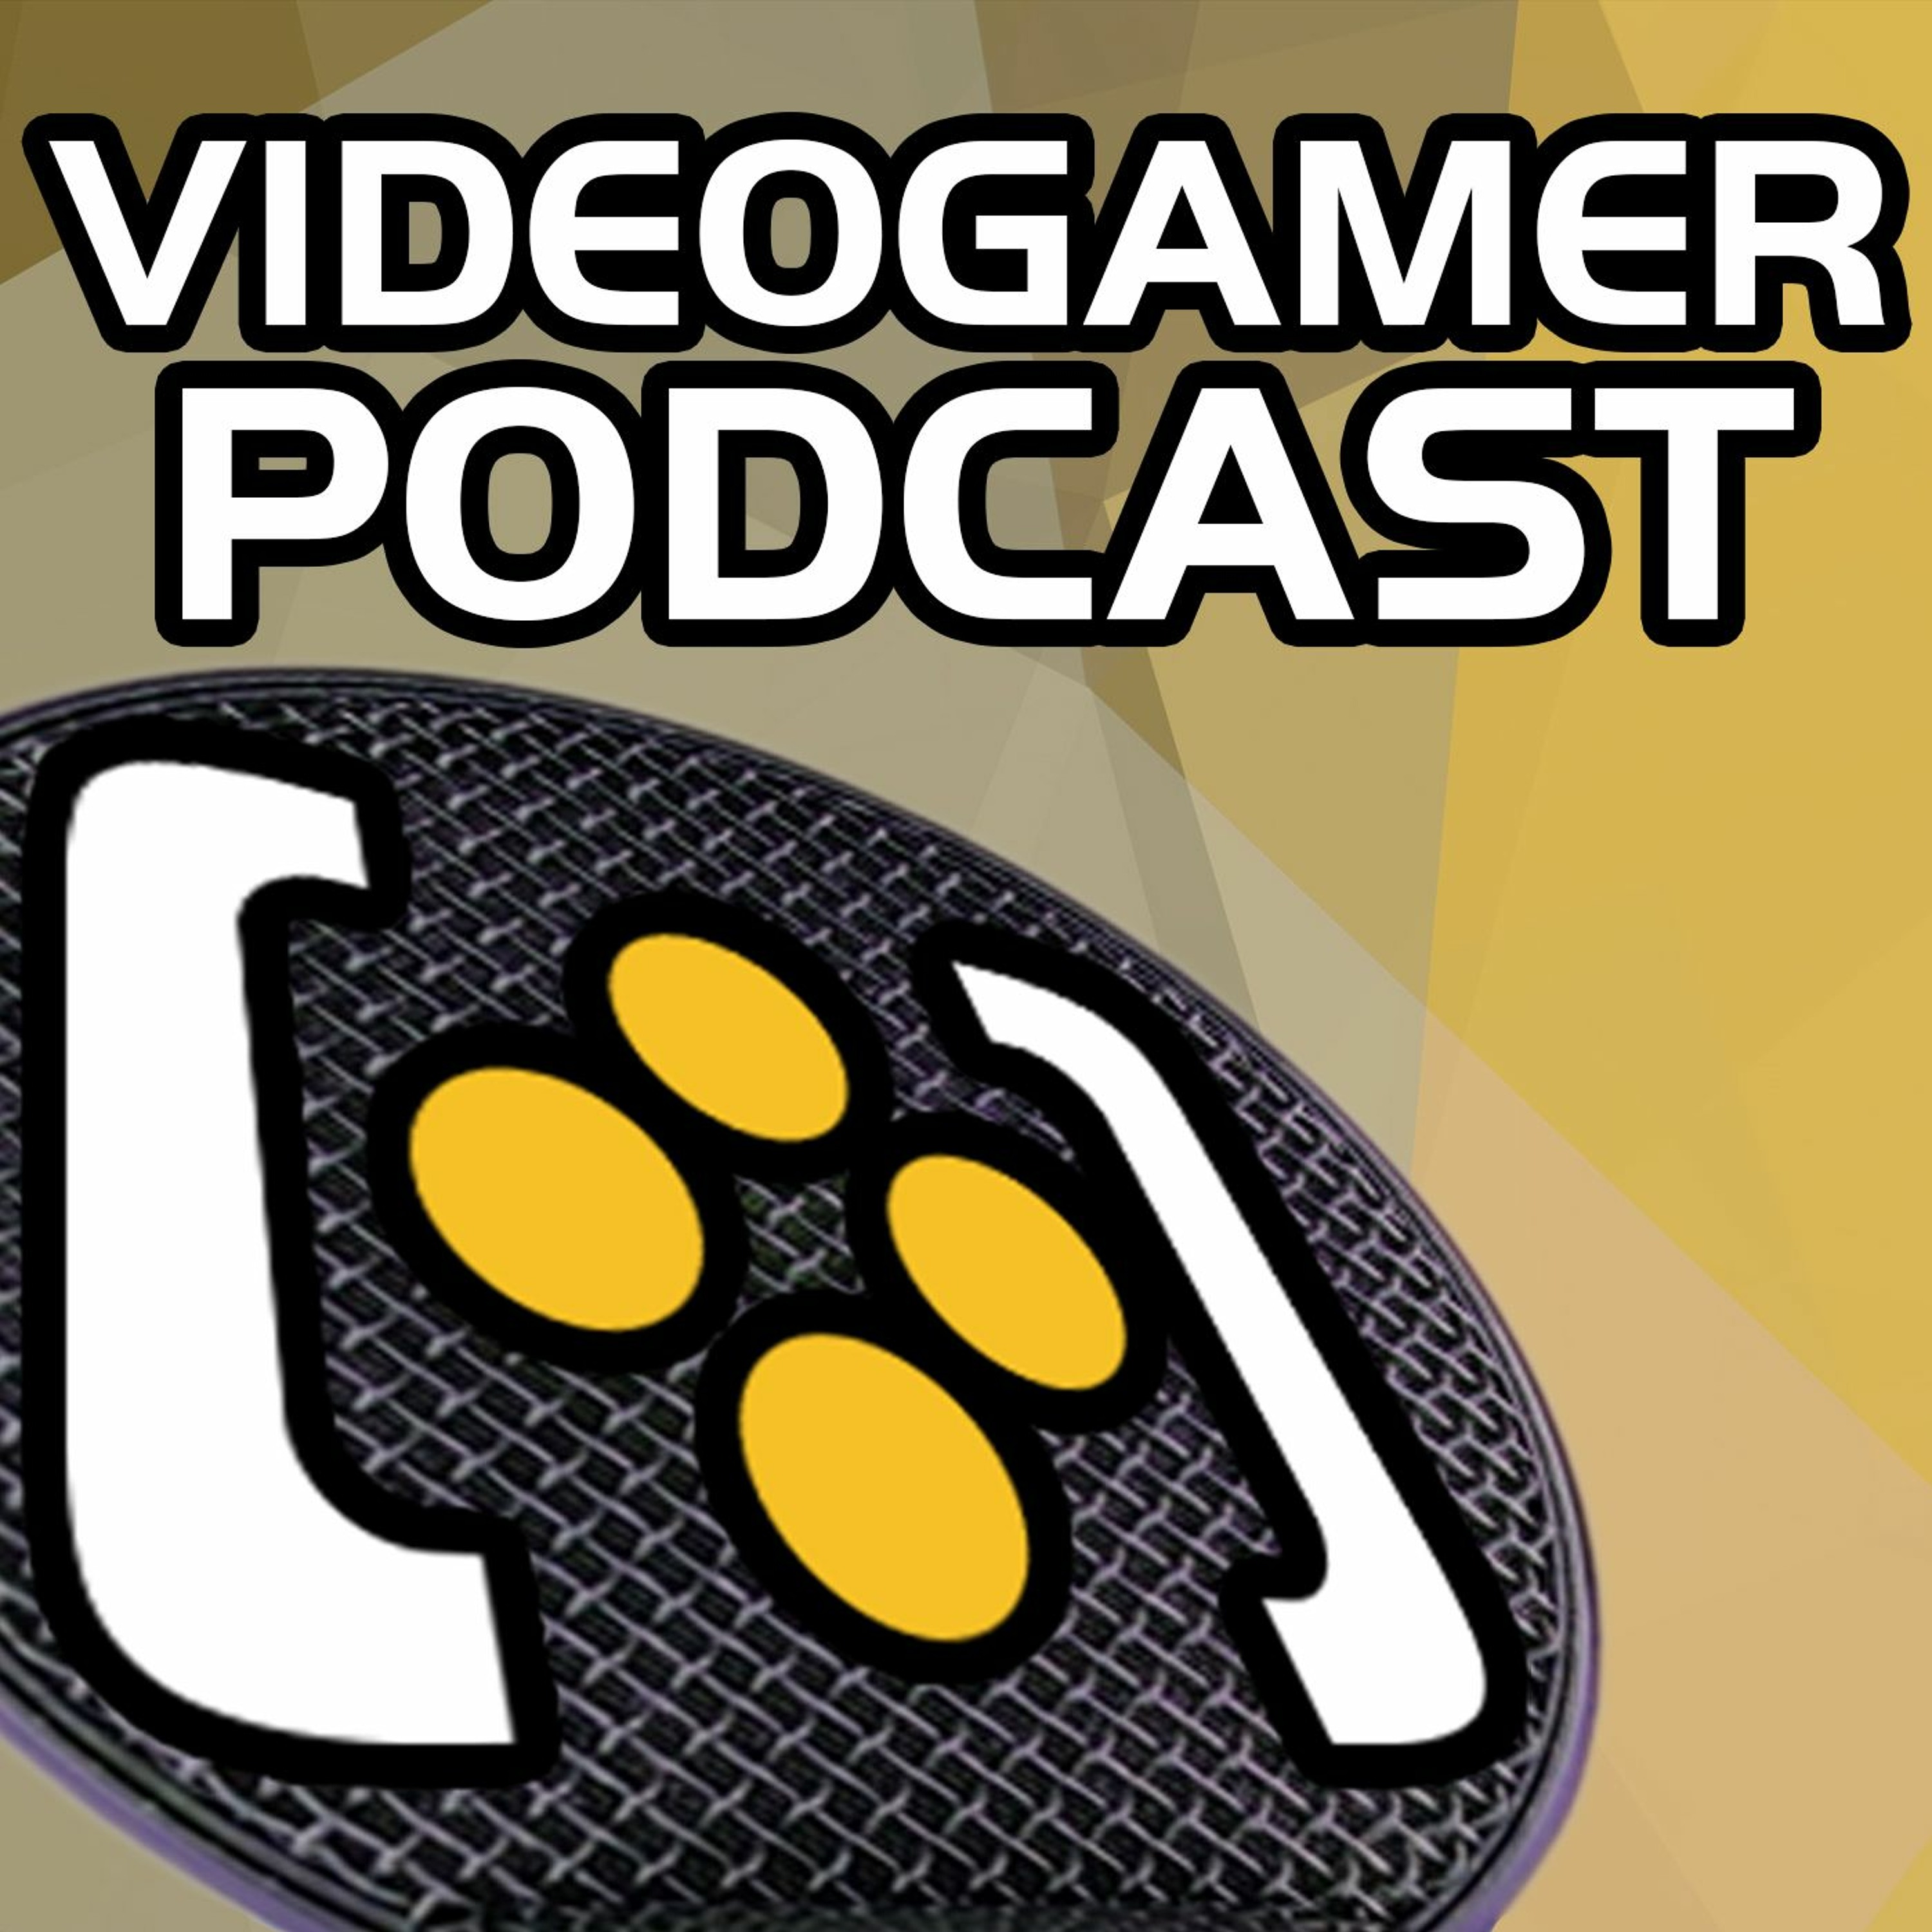 VideoGamer Podcast #486: Gods and Monsters